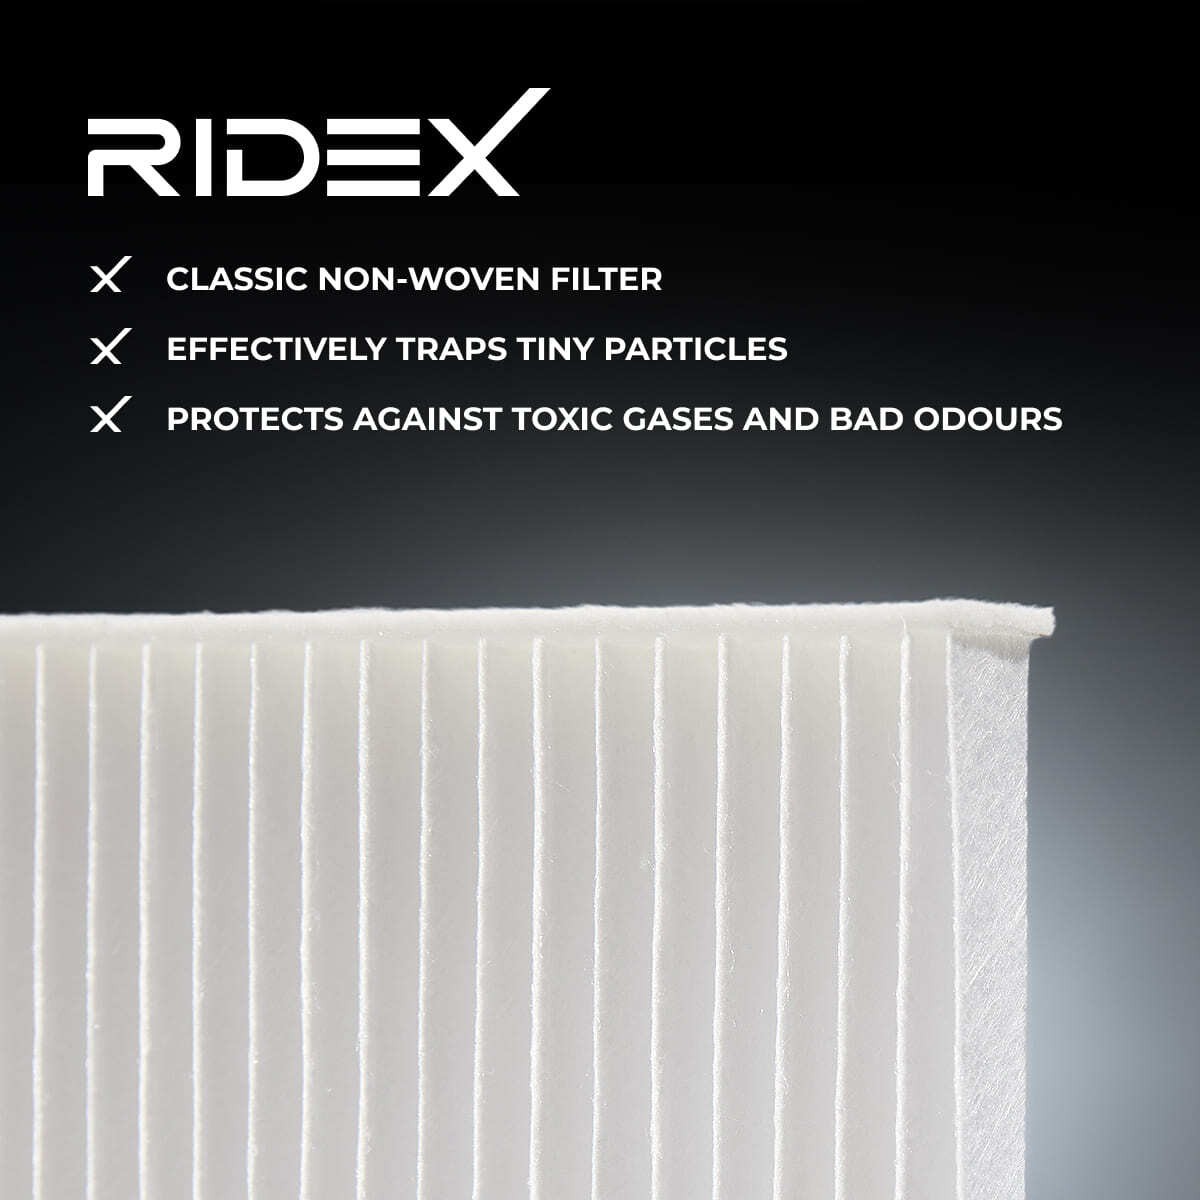 424I0005 Air con filter 424I0005 RIDEX Activated Carbon Filter x 204, 205 mm x 30 mm